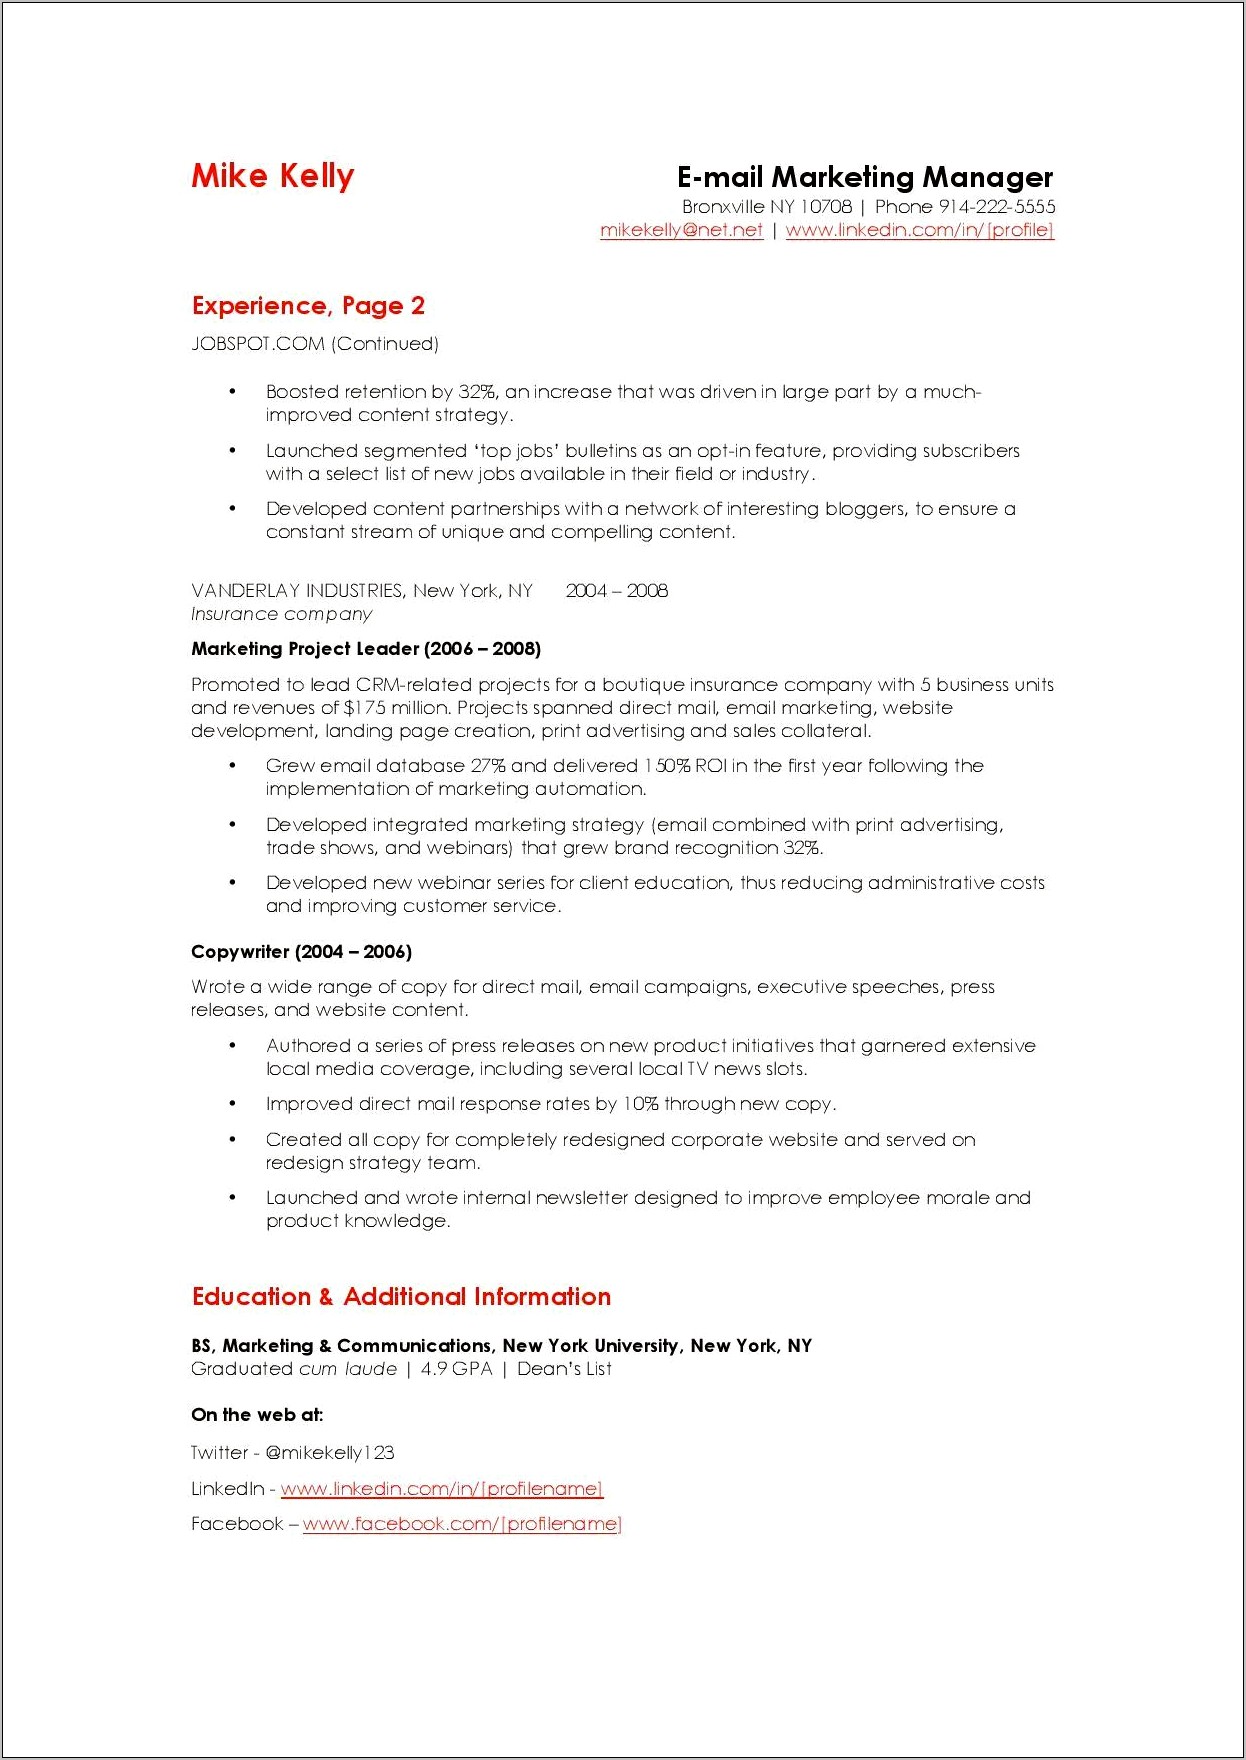 Resume For Direct Marketing Manager